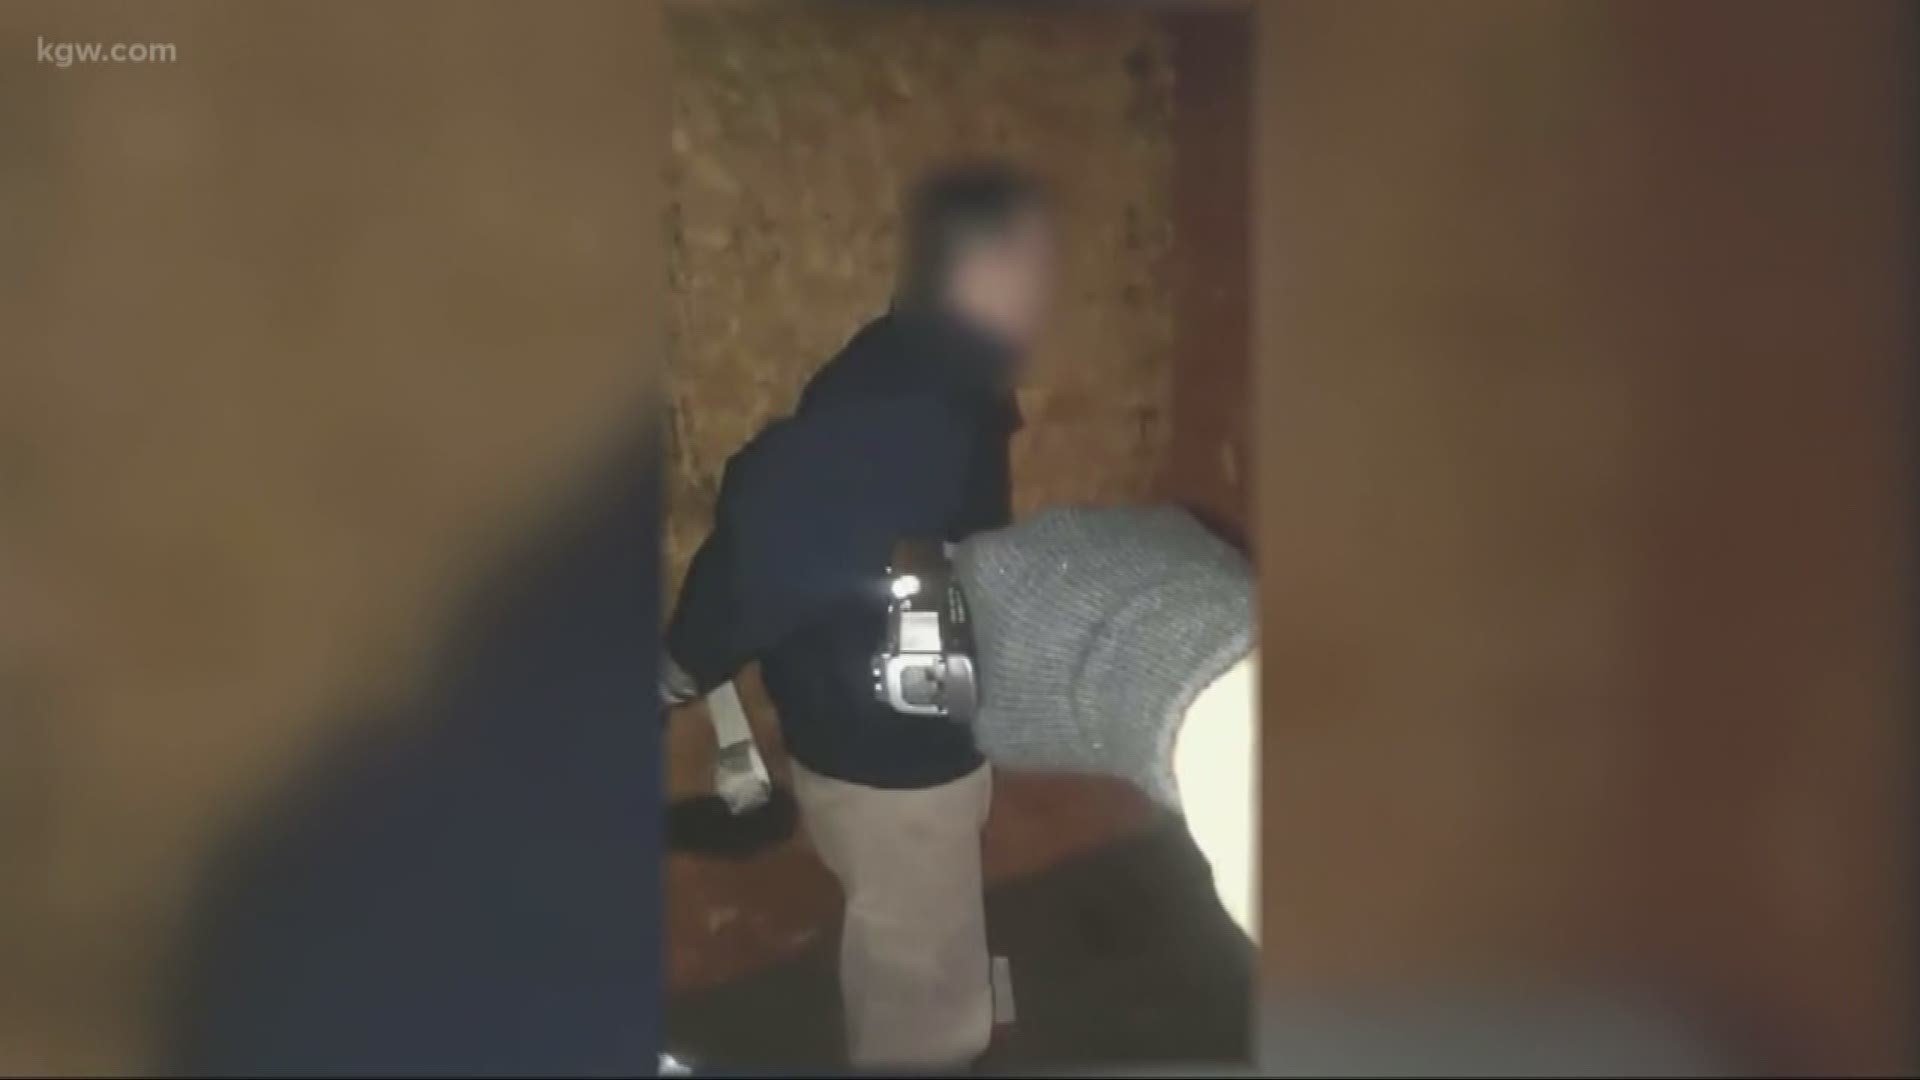 Caught on video: A death threat over marijuana. Watch the new video released by the Department of Justice.